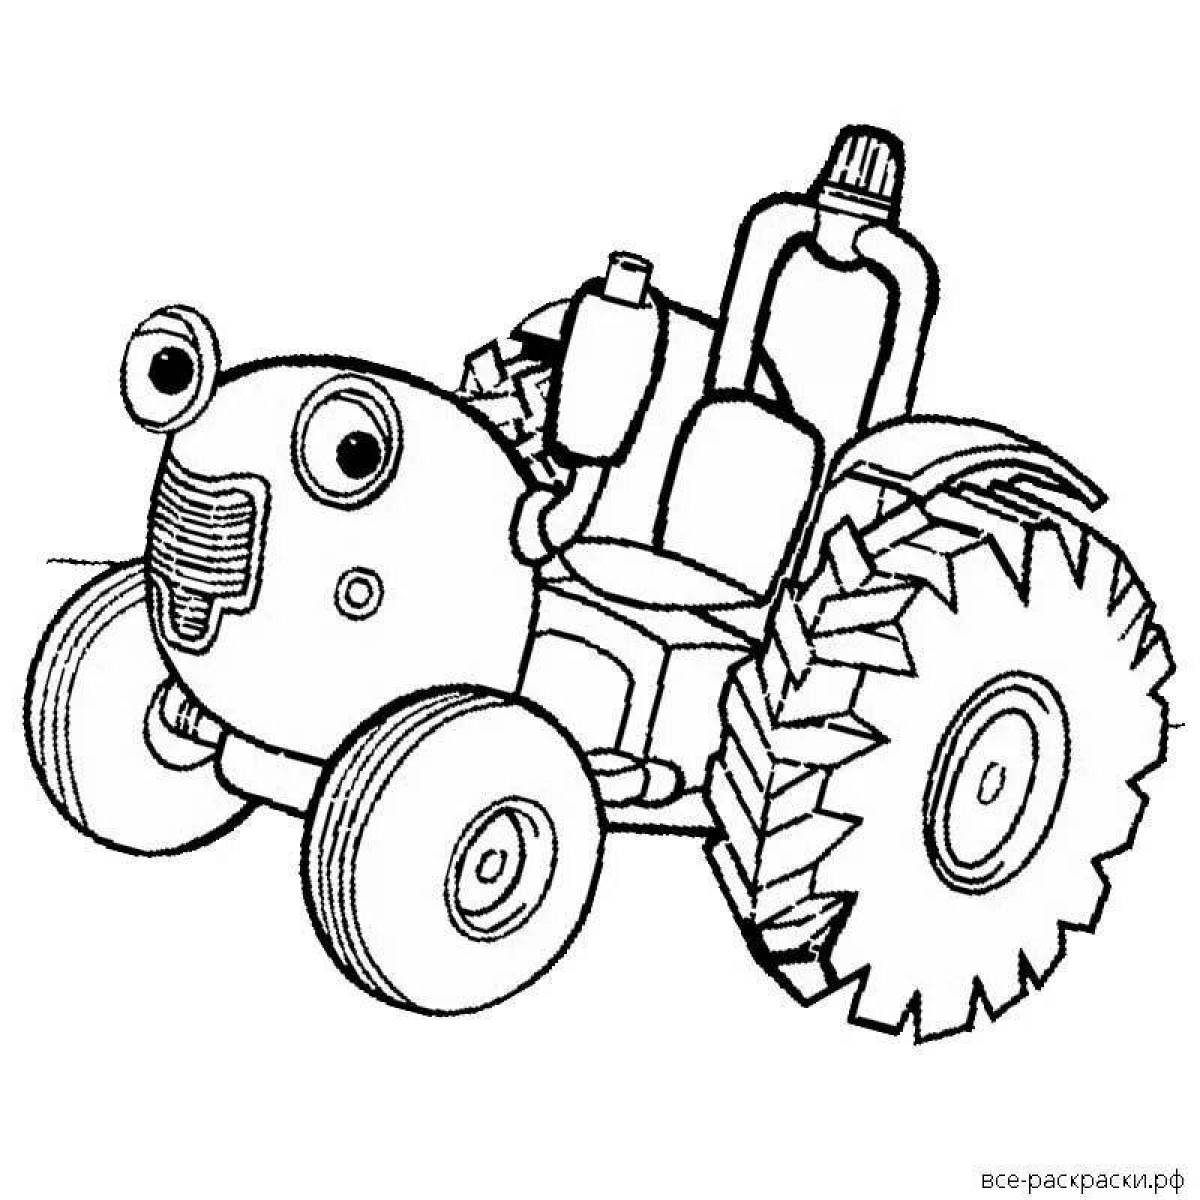 Fancy blue tractor coloring book for kids